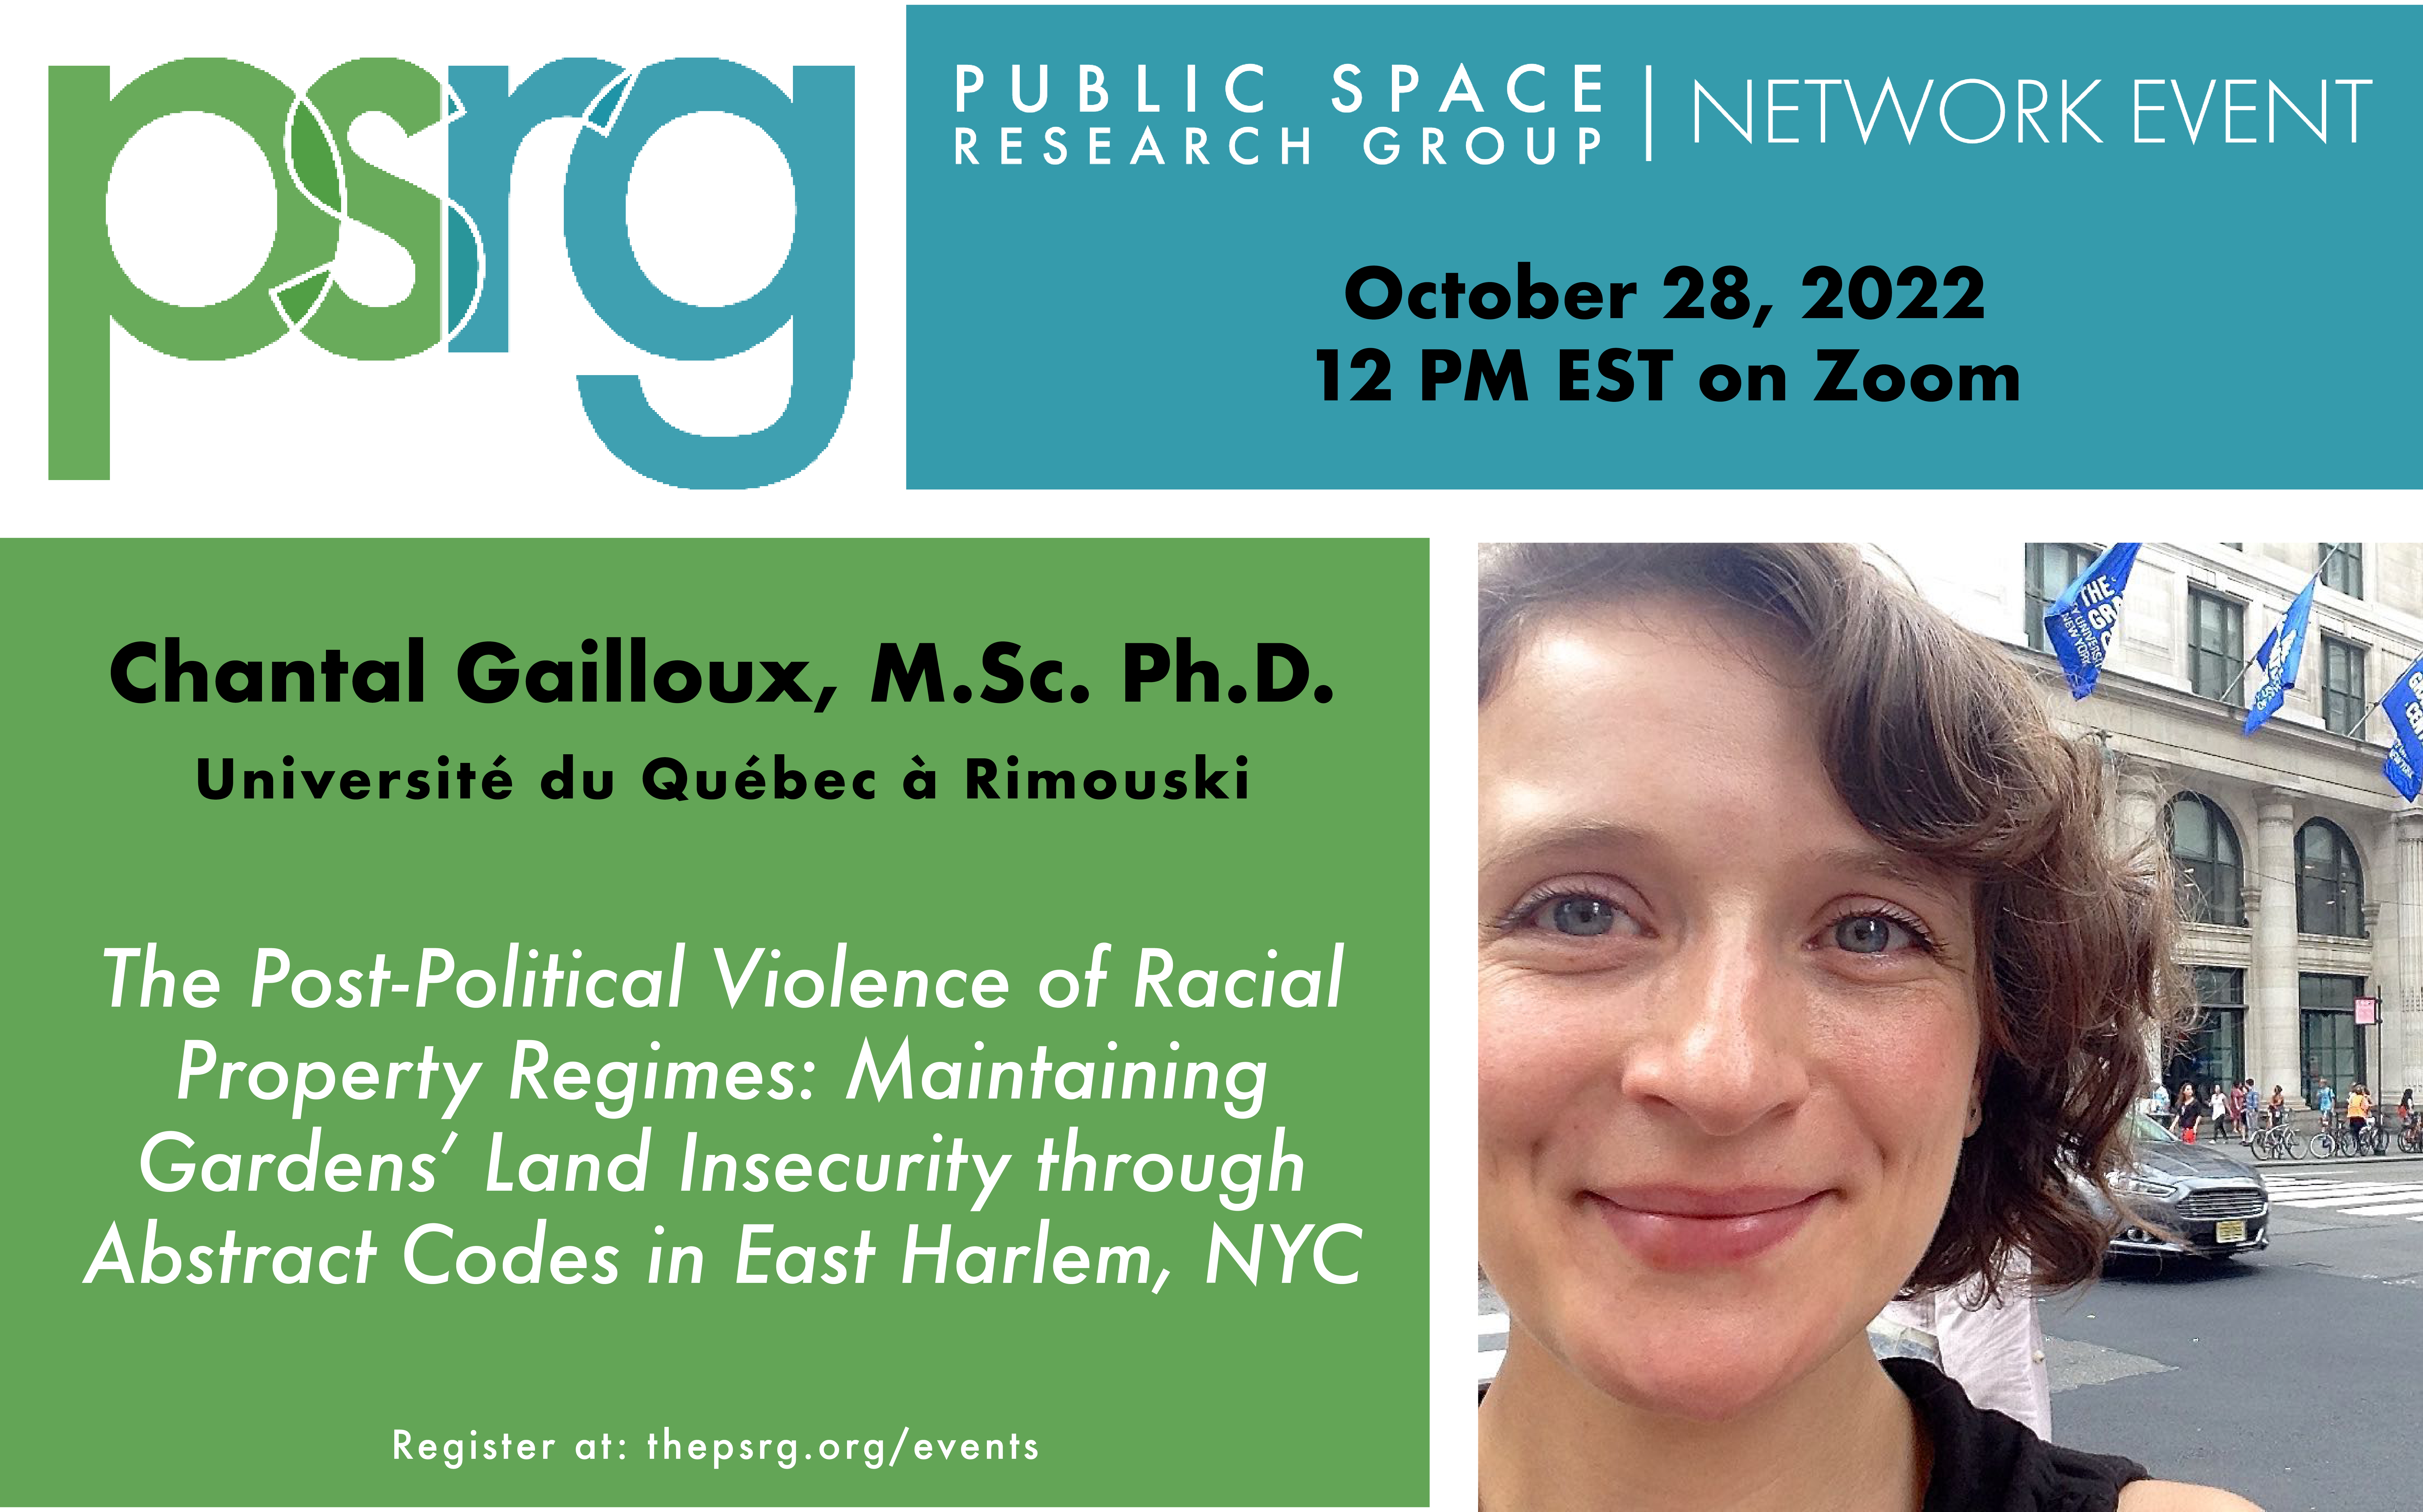 OCTOBER 28 @12ET:: Chantal Gailloux presents: The Post-Political Violence of Racial Property Regimes: Maintaining Gardens’ Land Insecurity through Abstract Codes in East Harlem, NYC